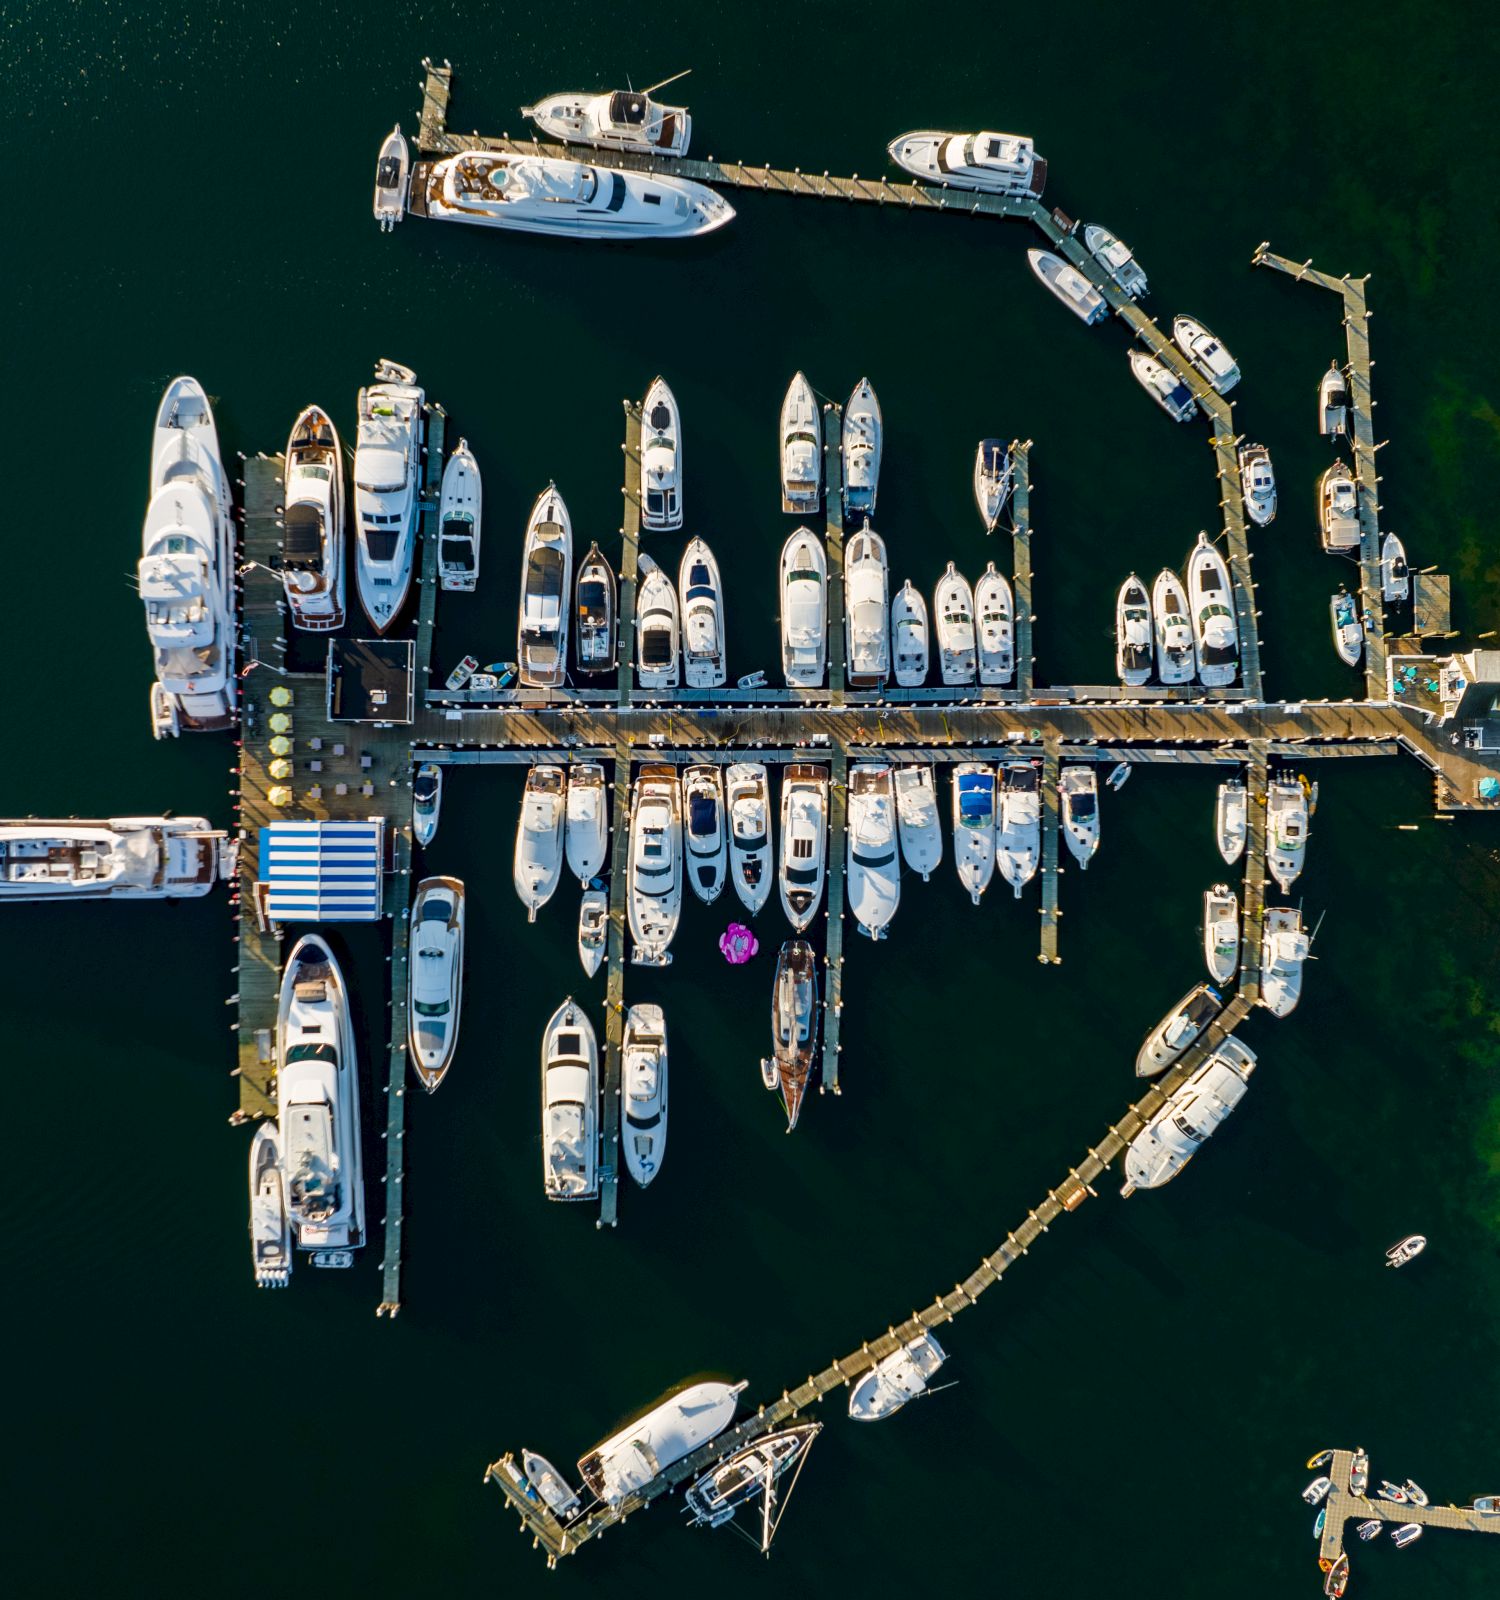 An aerial view of a marina filled with numerous boats and yachts docked along various piers, with a small building and vegetation visible on the right.